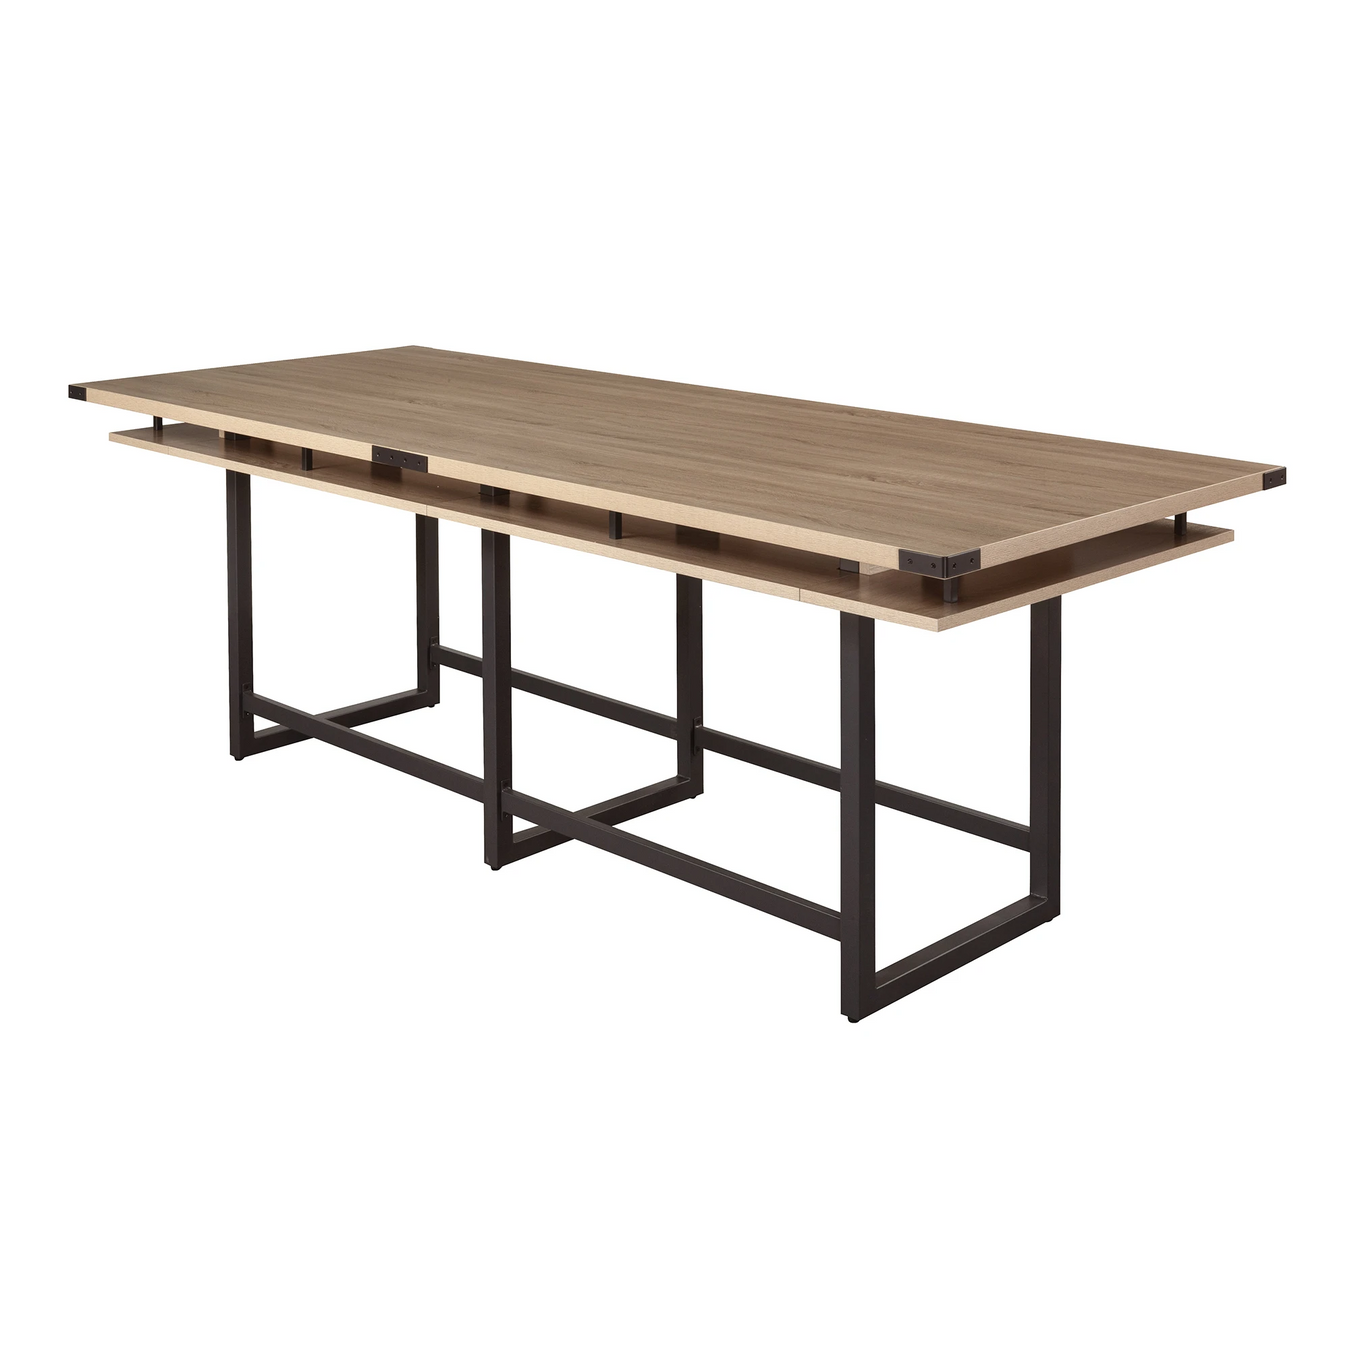 Standing Conference Tables